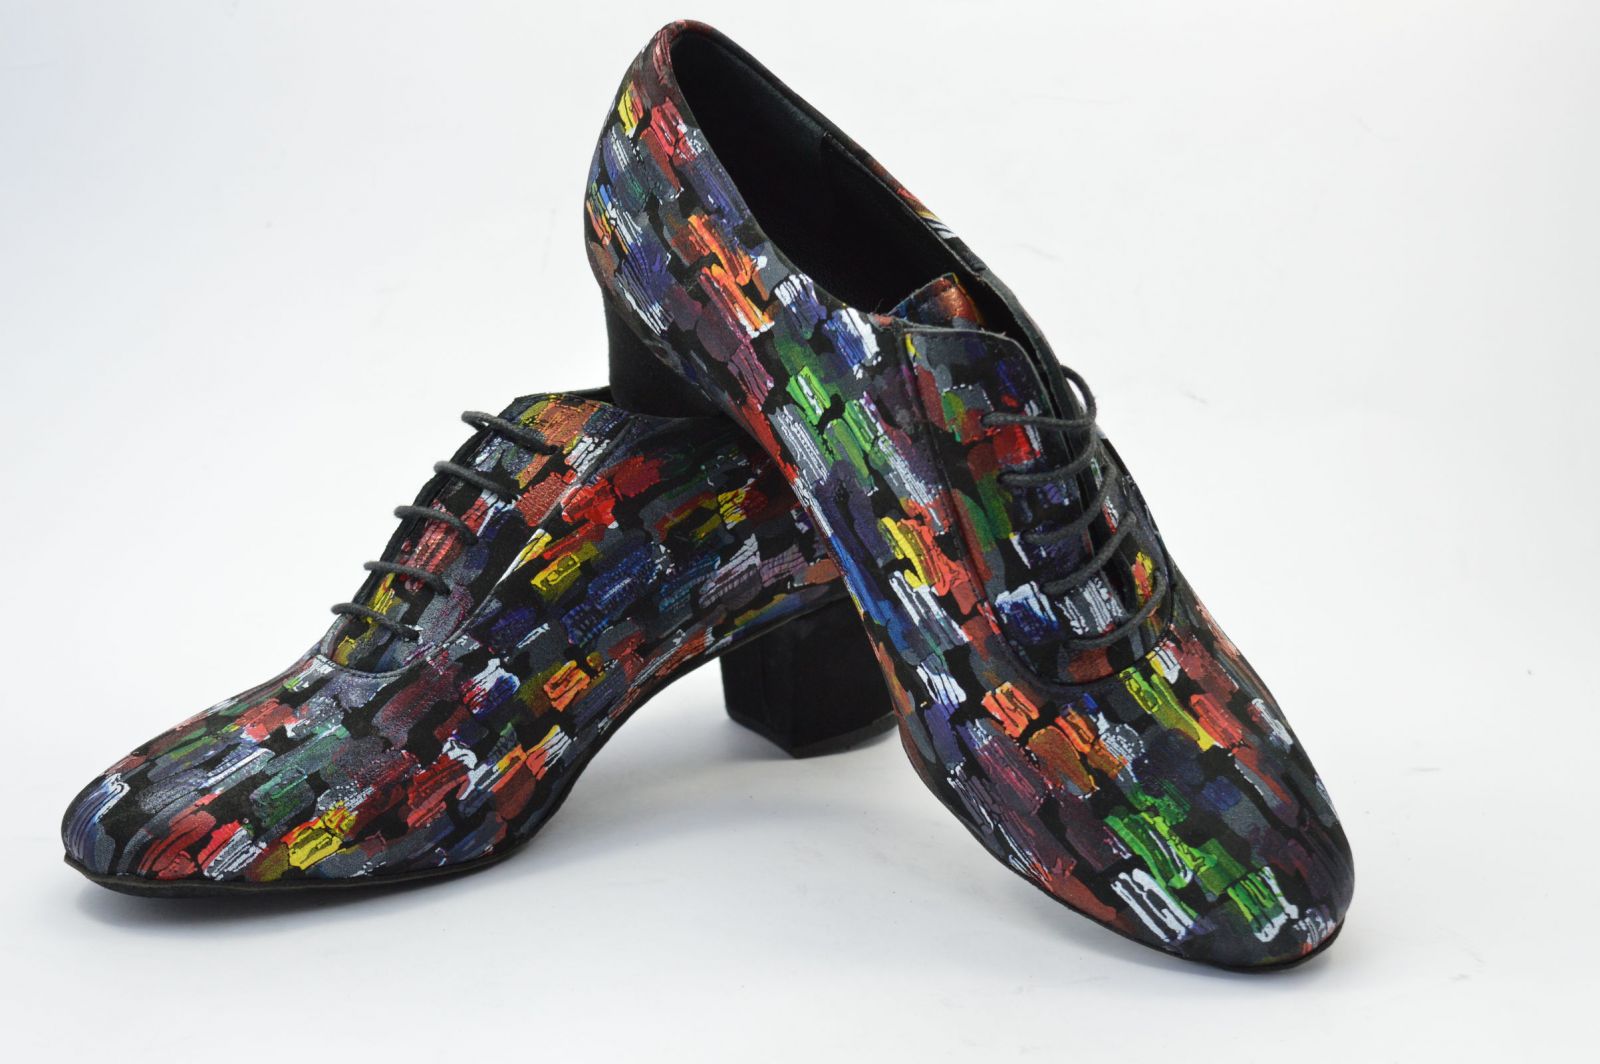 Women's argentine tango shoes, oxford style, in very soft black leather and multi-colour prints.